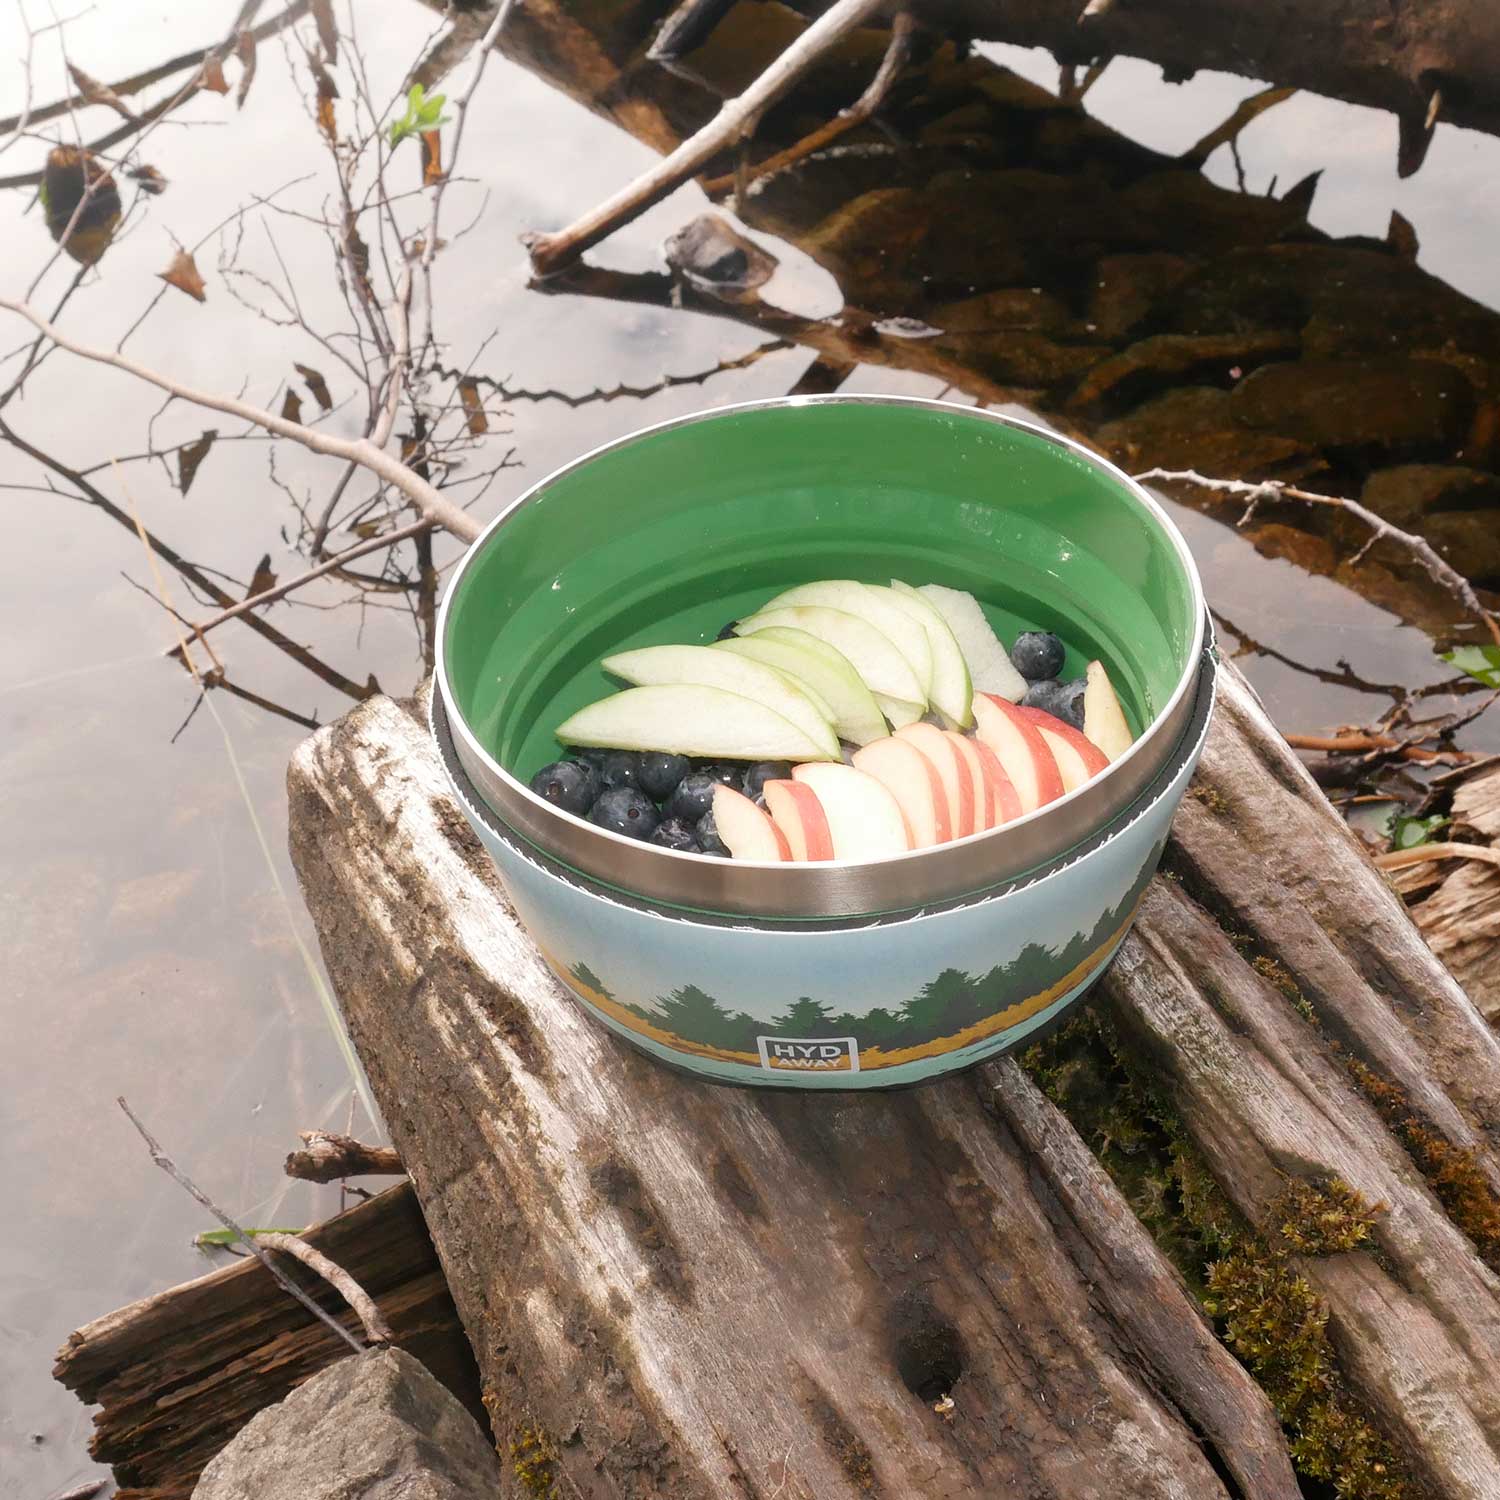 Collapsible Insulated Bowl | 1.5-Cup - Cascadia